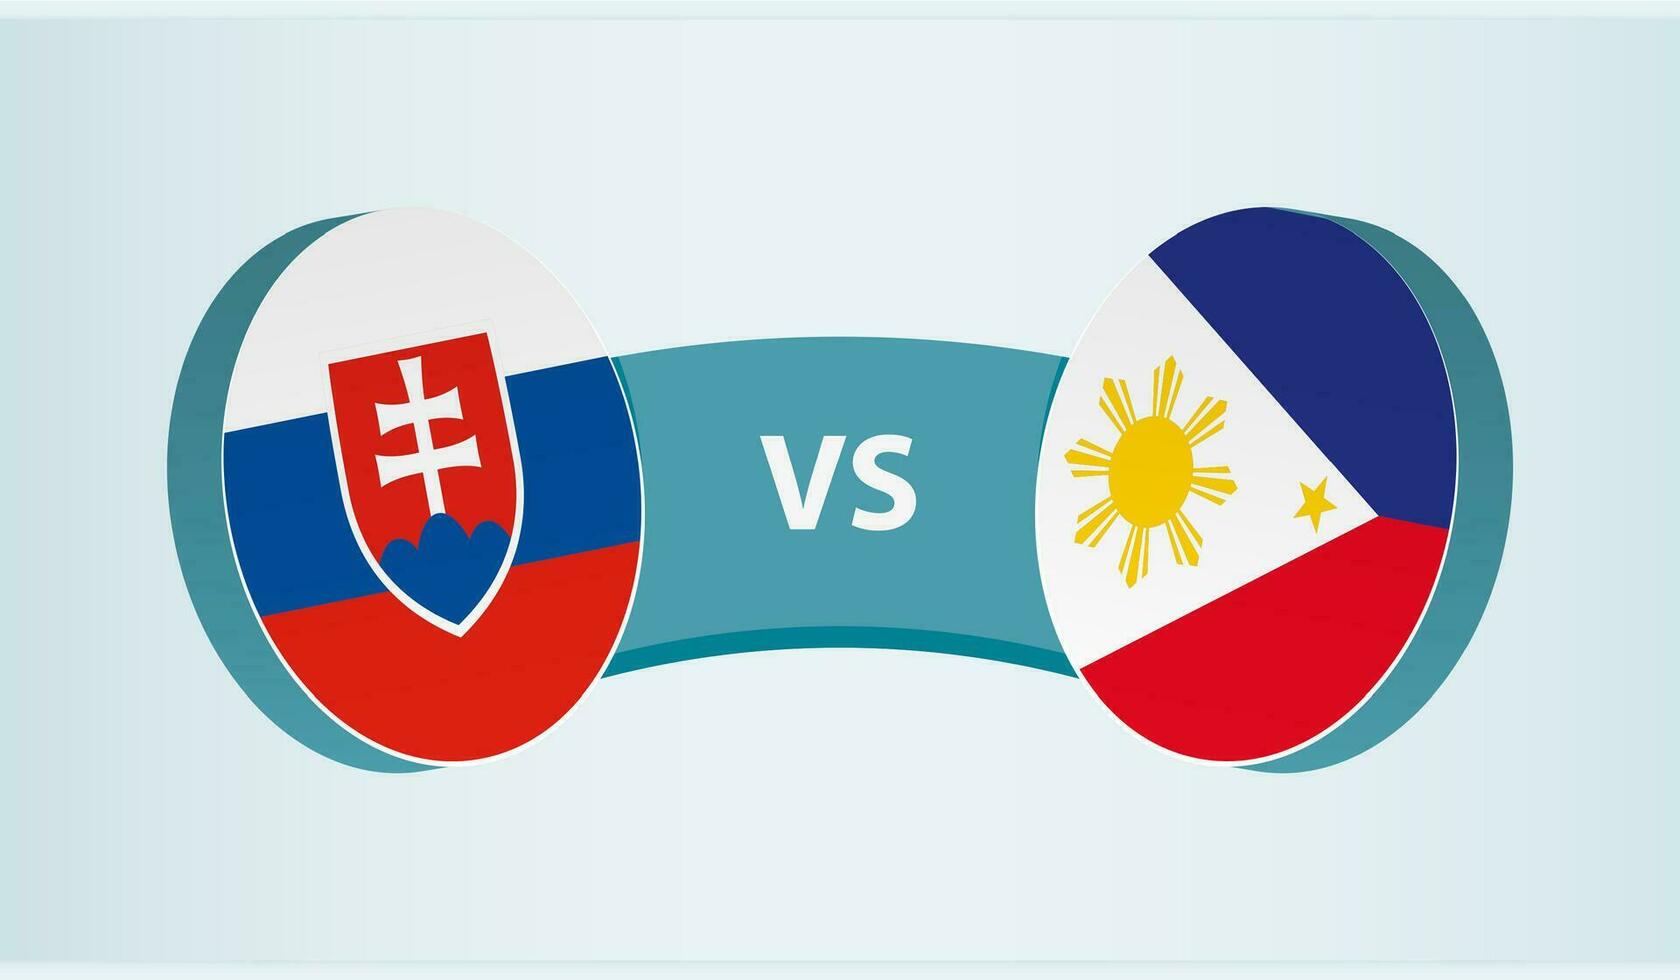 Slovakia versus Philippines, team sports competition concept. vector